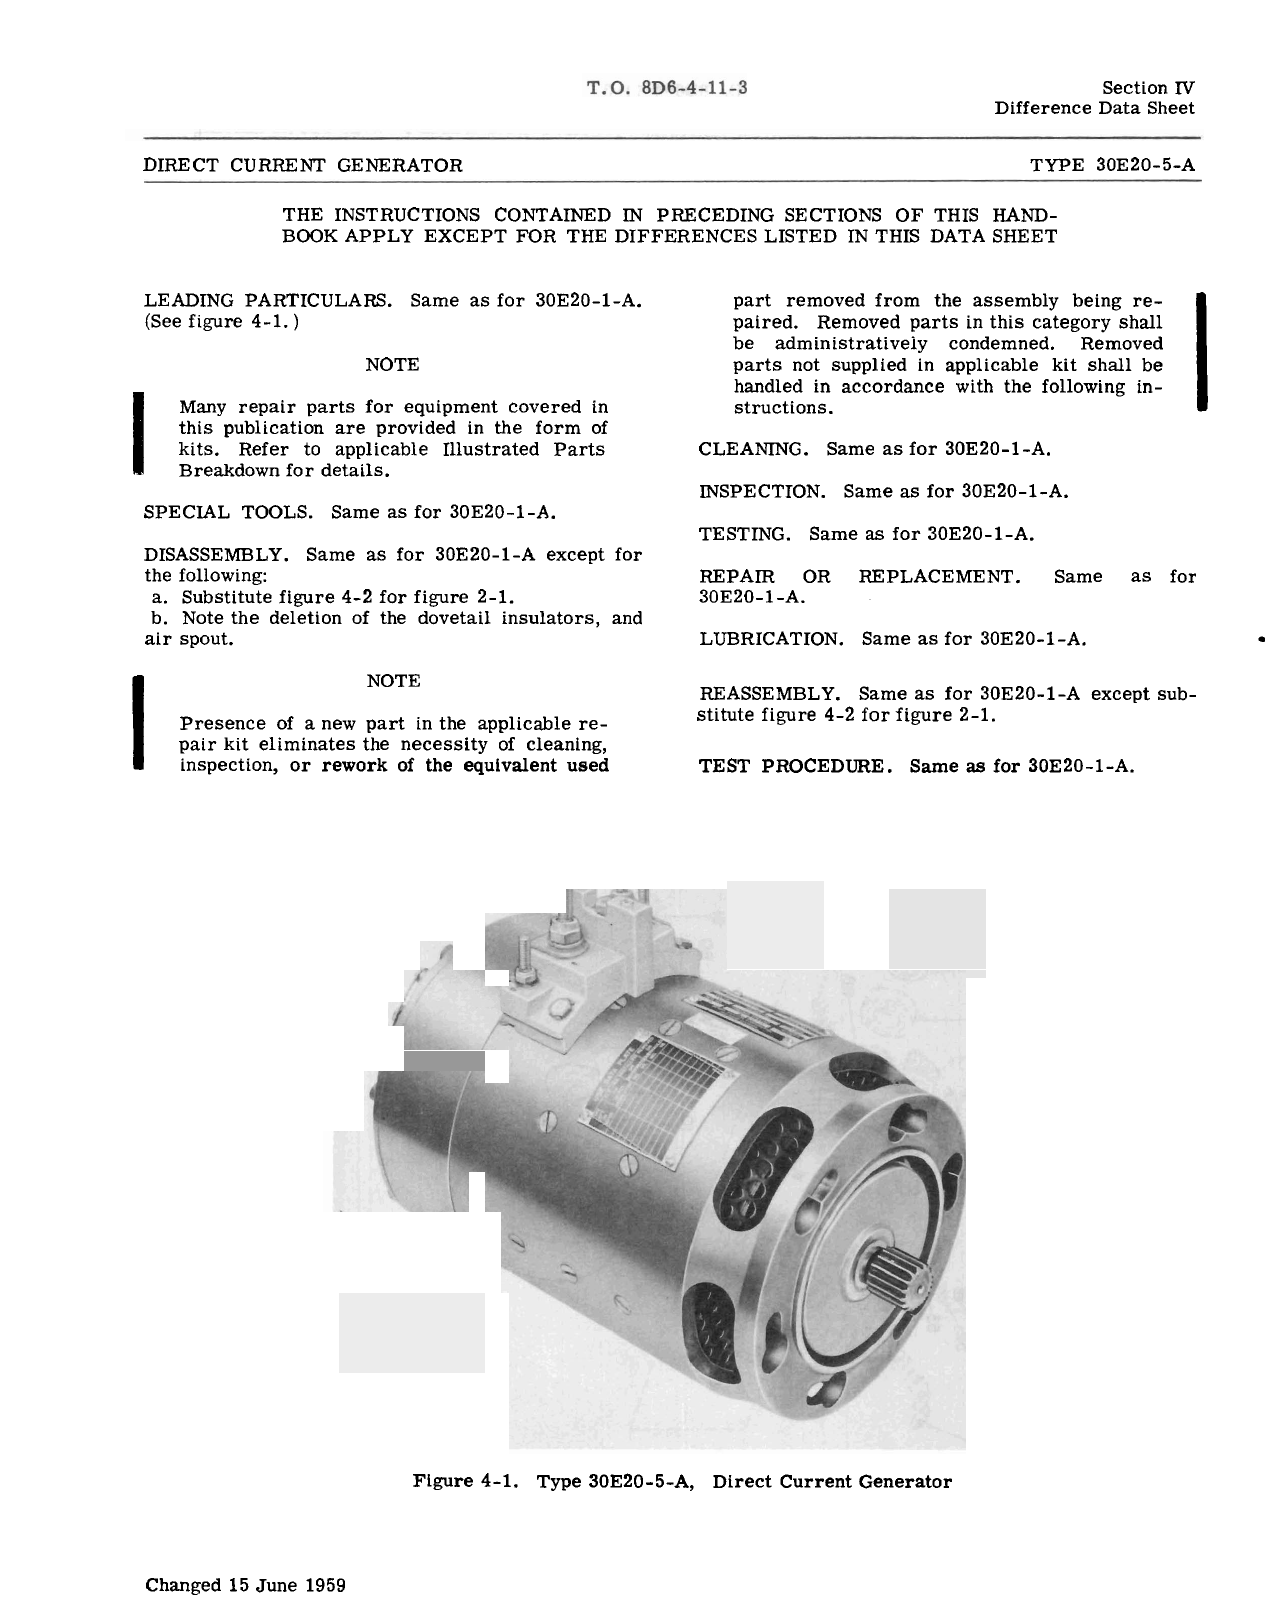 Sample page 9 from AirCorps Library document: Overhaul for Direct Current Generator - Types 30E20-1-A, 30E20-5-A, 30E20-5-B, 30E20-19-A, and 30E20-33-B 